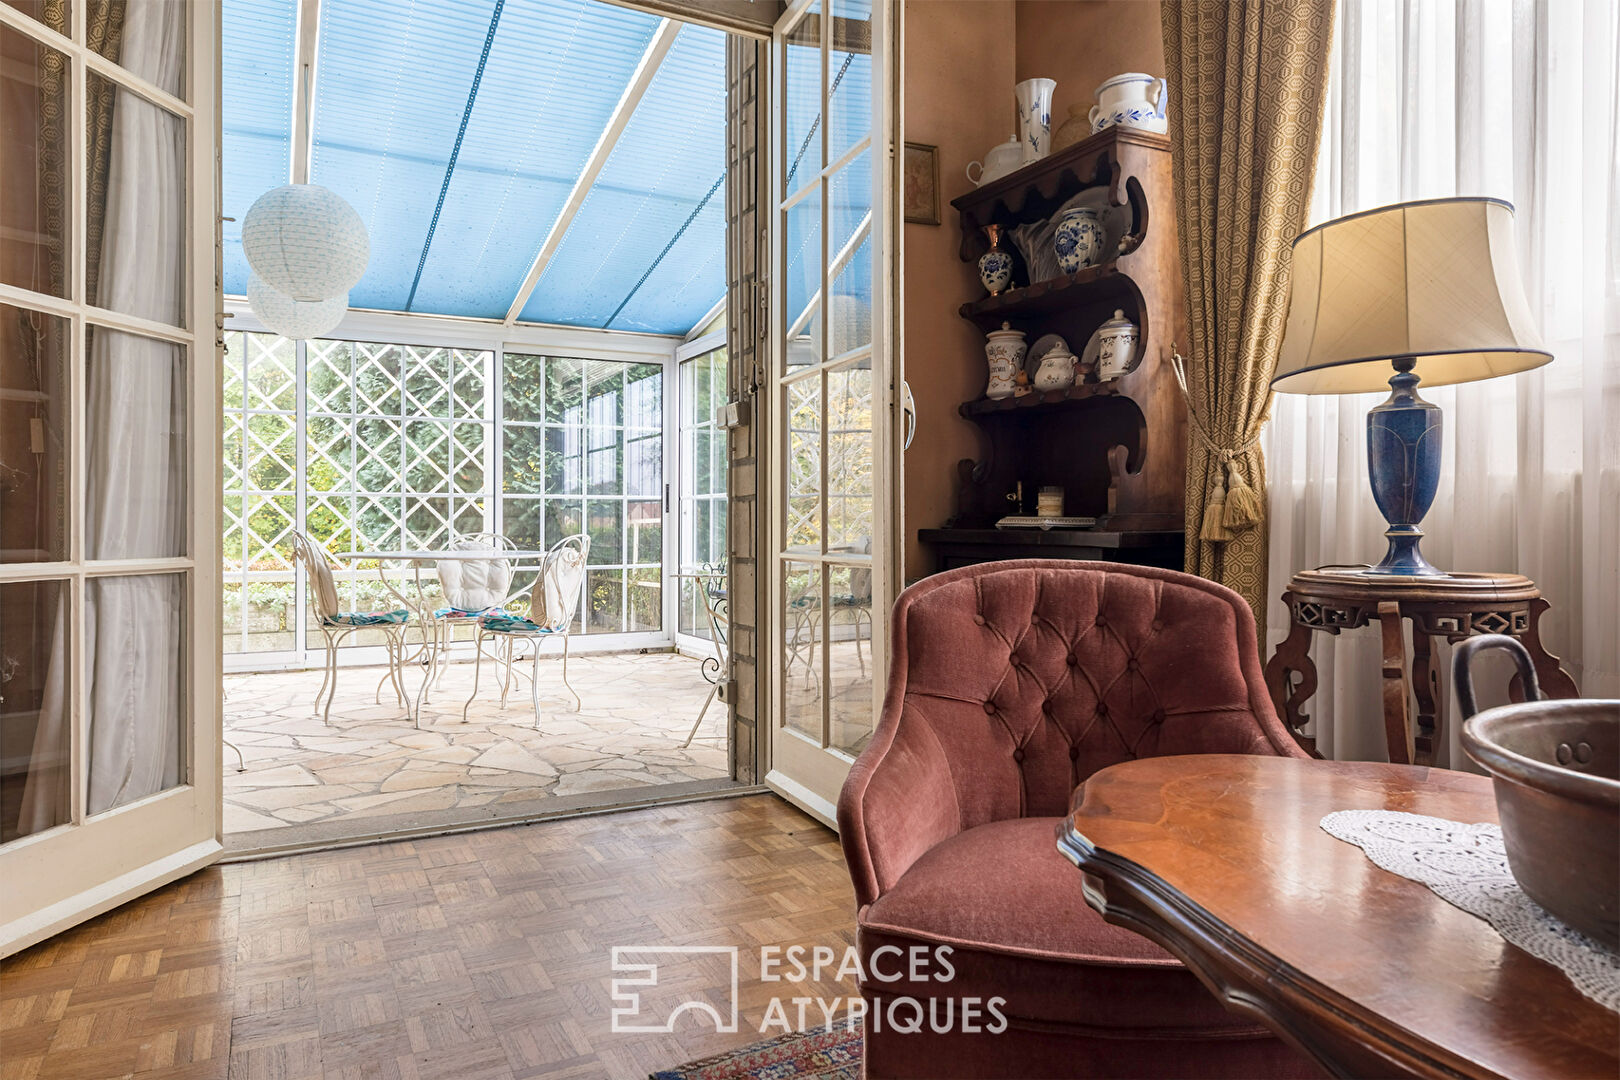 La grandiose – Family house of 251sqm living space and its independent professional space.